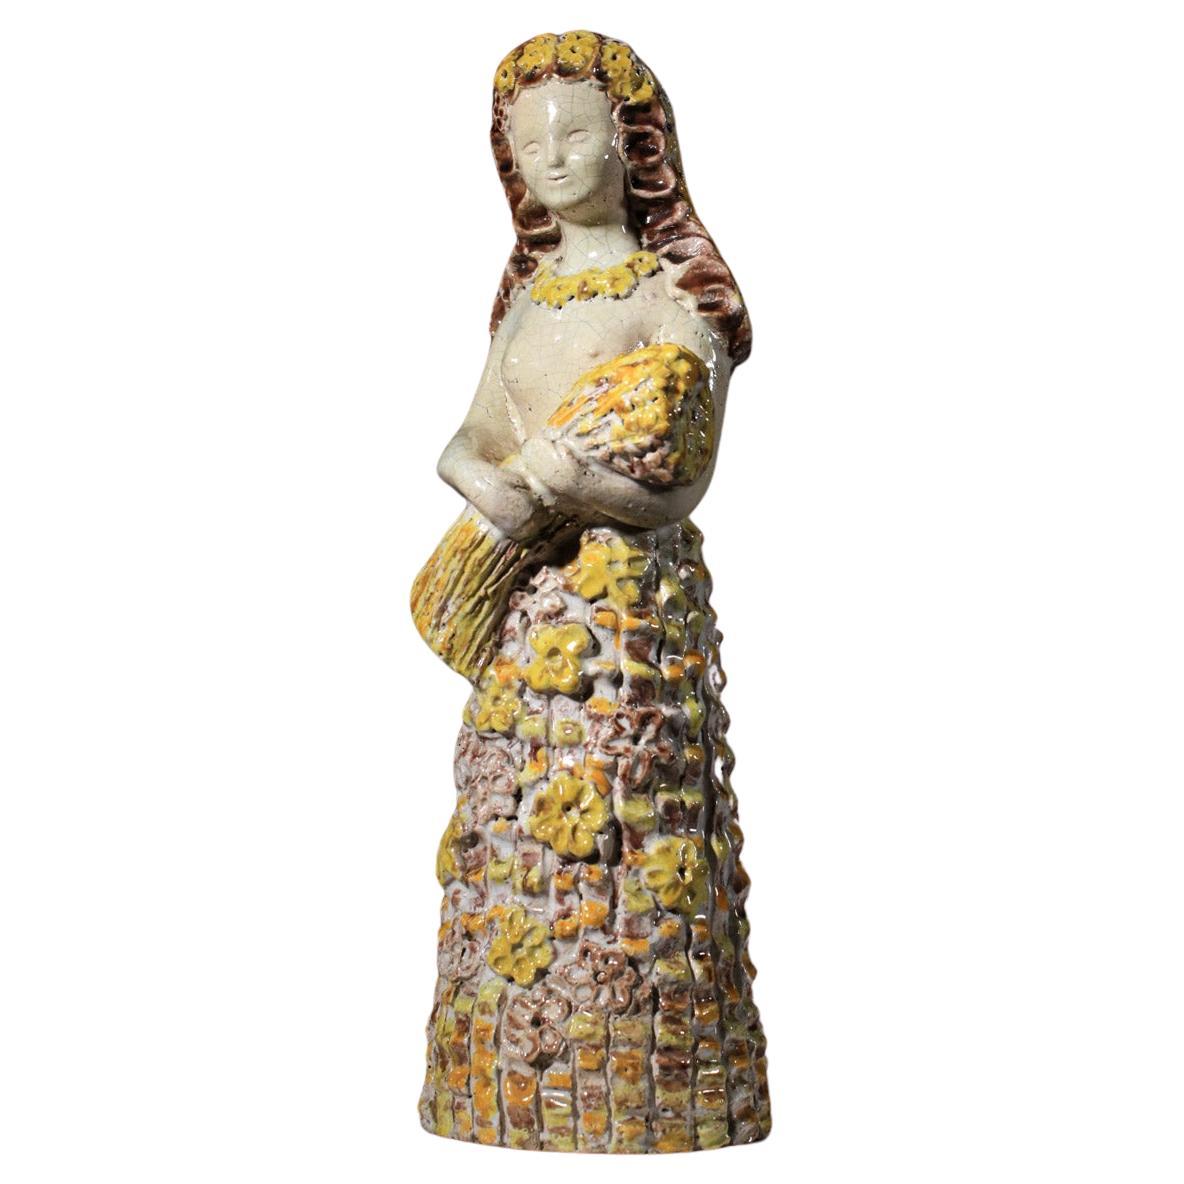 Ceramic goddess by Denise Picard from the Paul Pouchol workshop George Jove